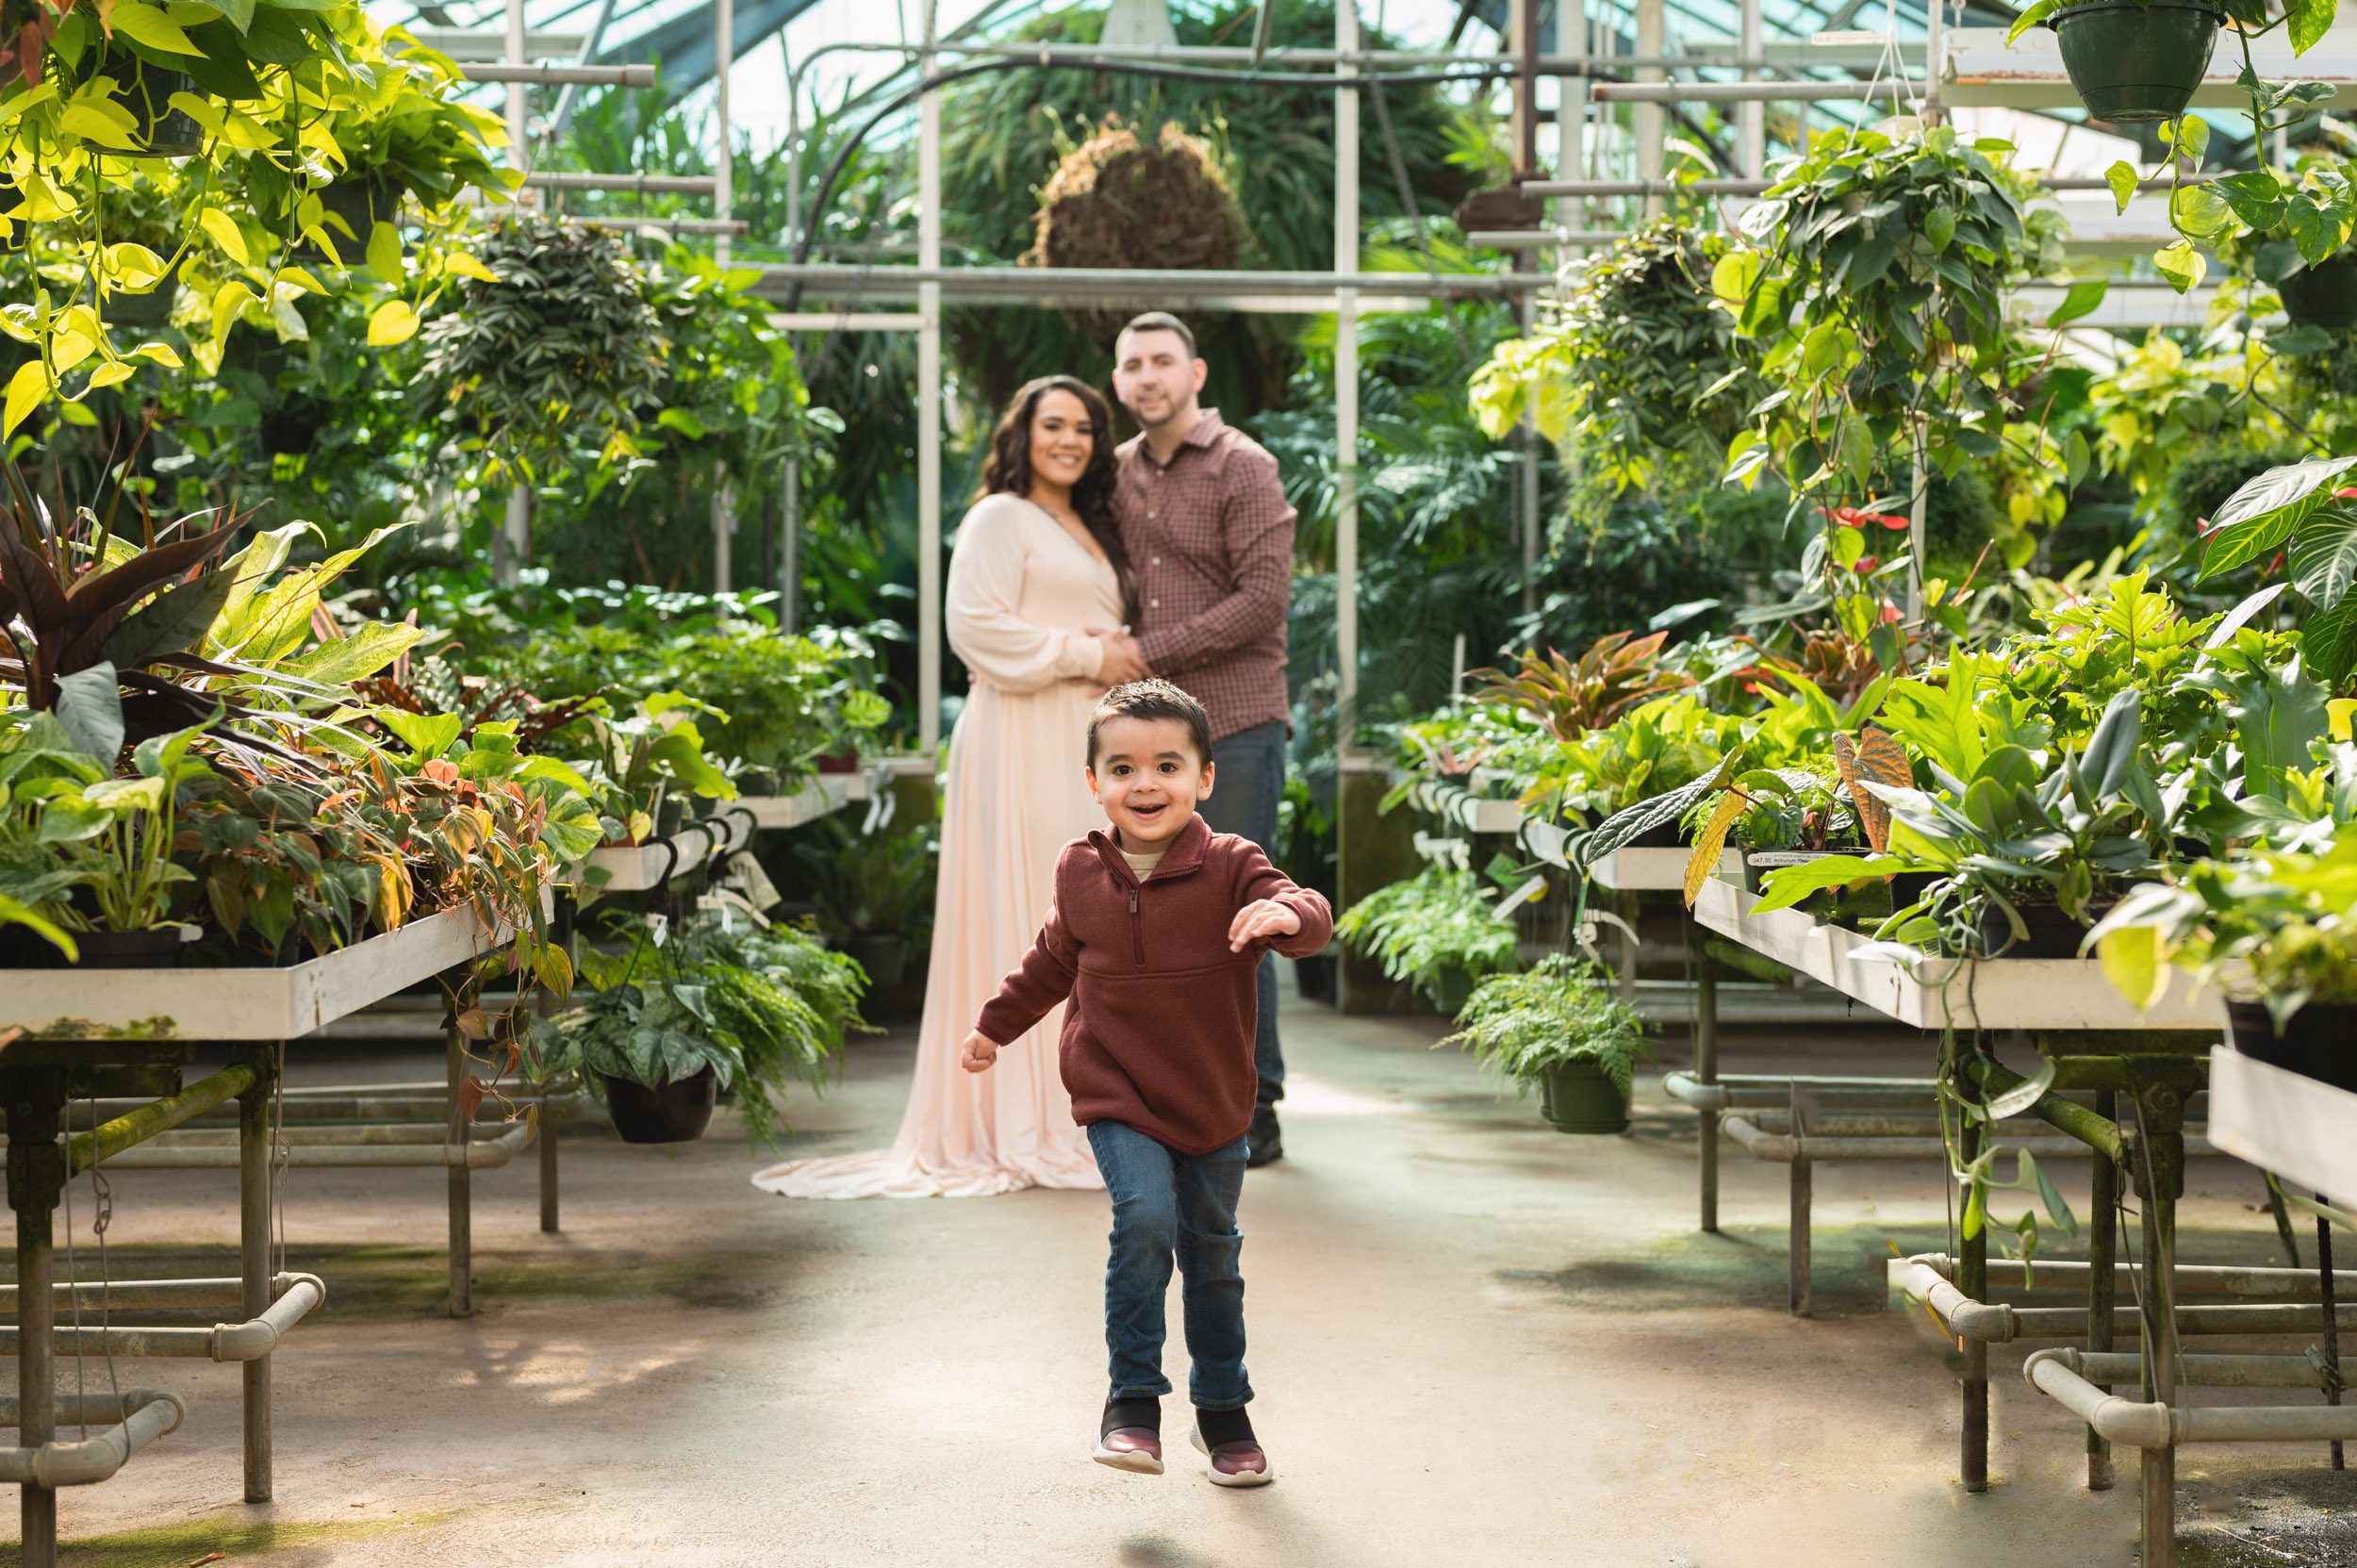 a young boy running toward the camera with his parents standing in the background and smiling at him as they watch him during a Collegeville greenhouse maternity photography session